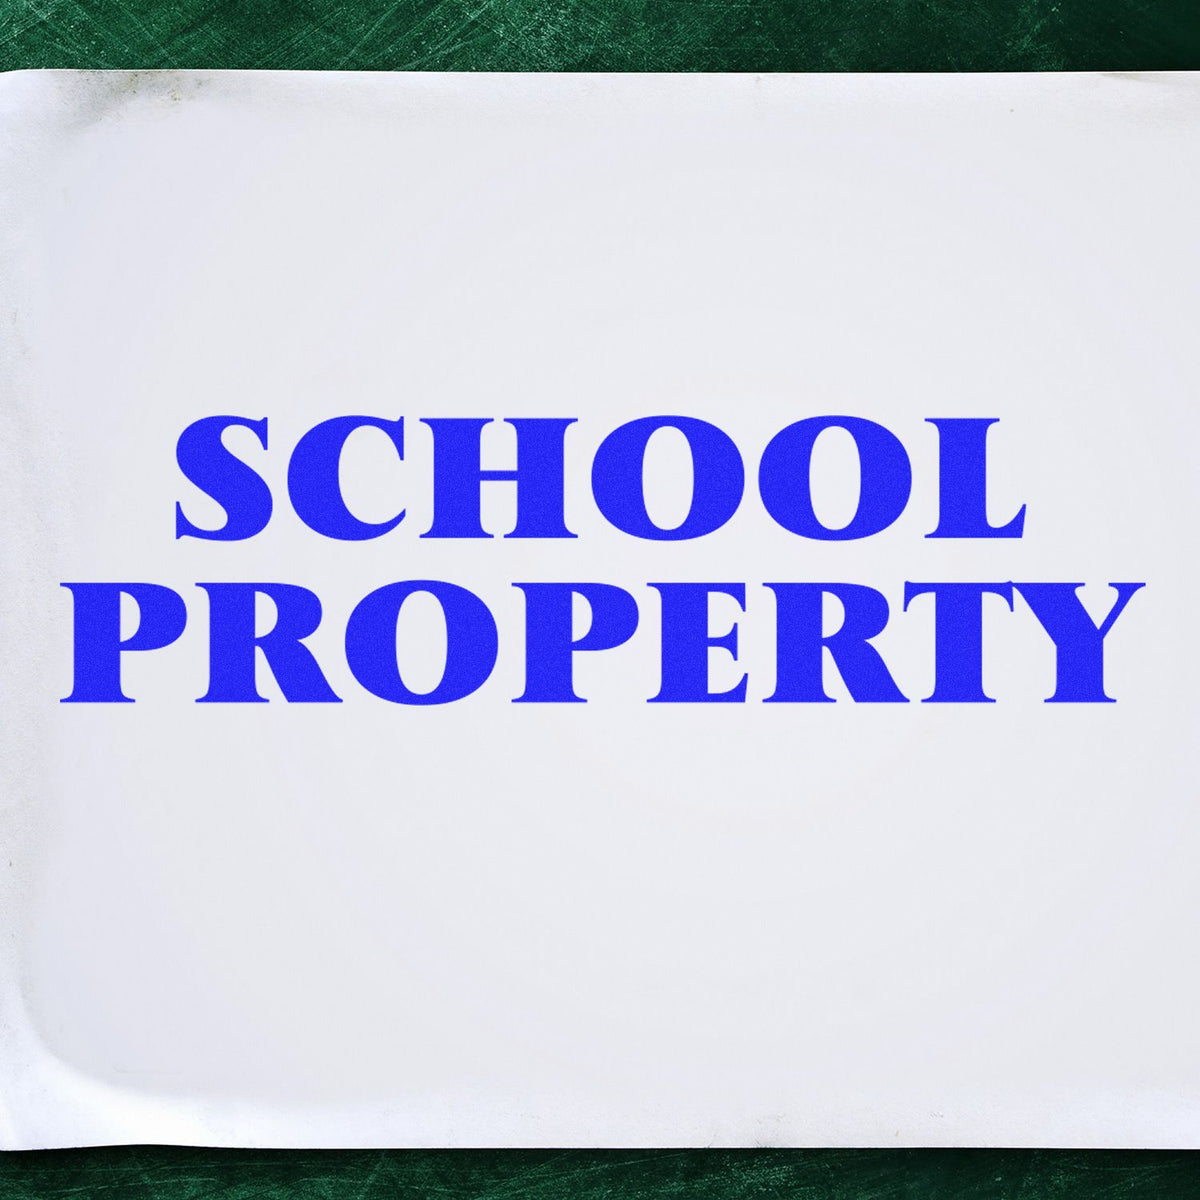 School Property Rubber Stamp In Use Photo